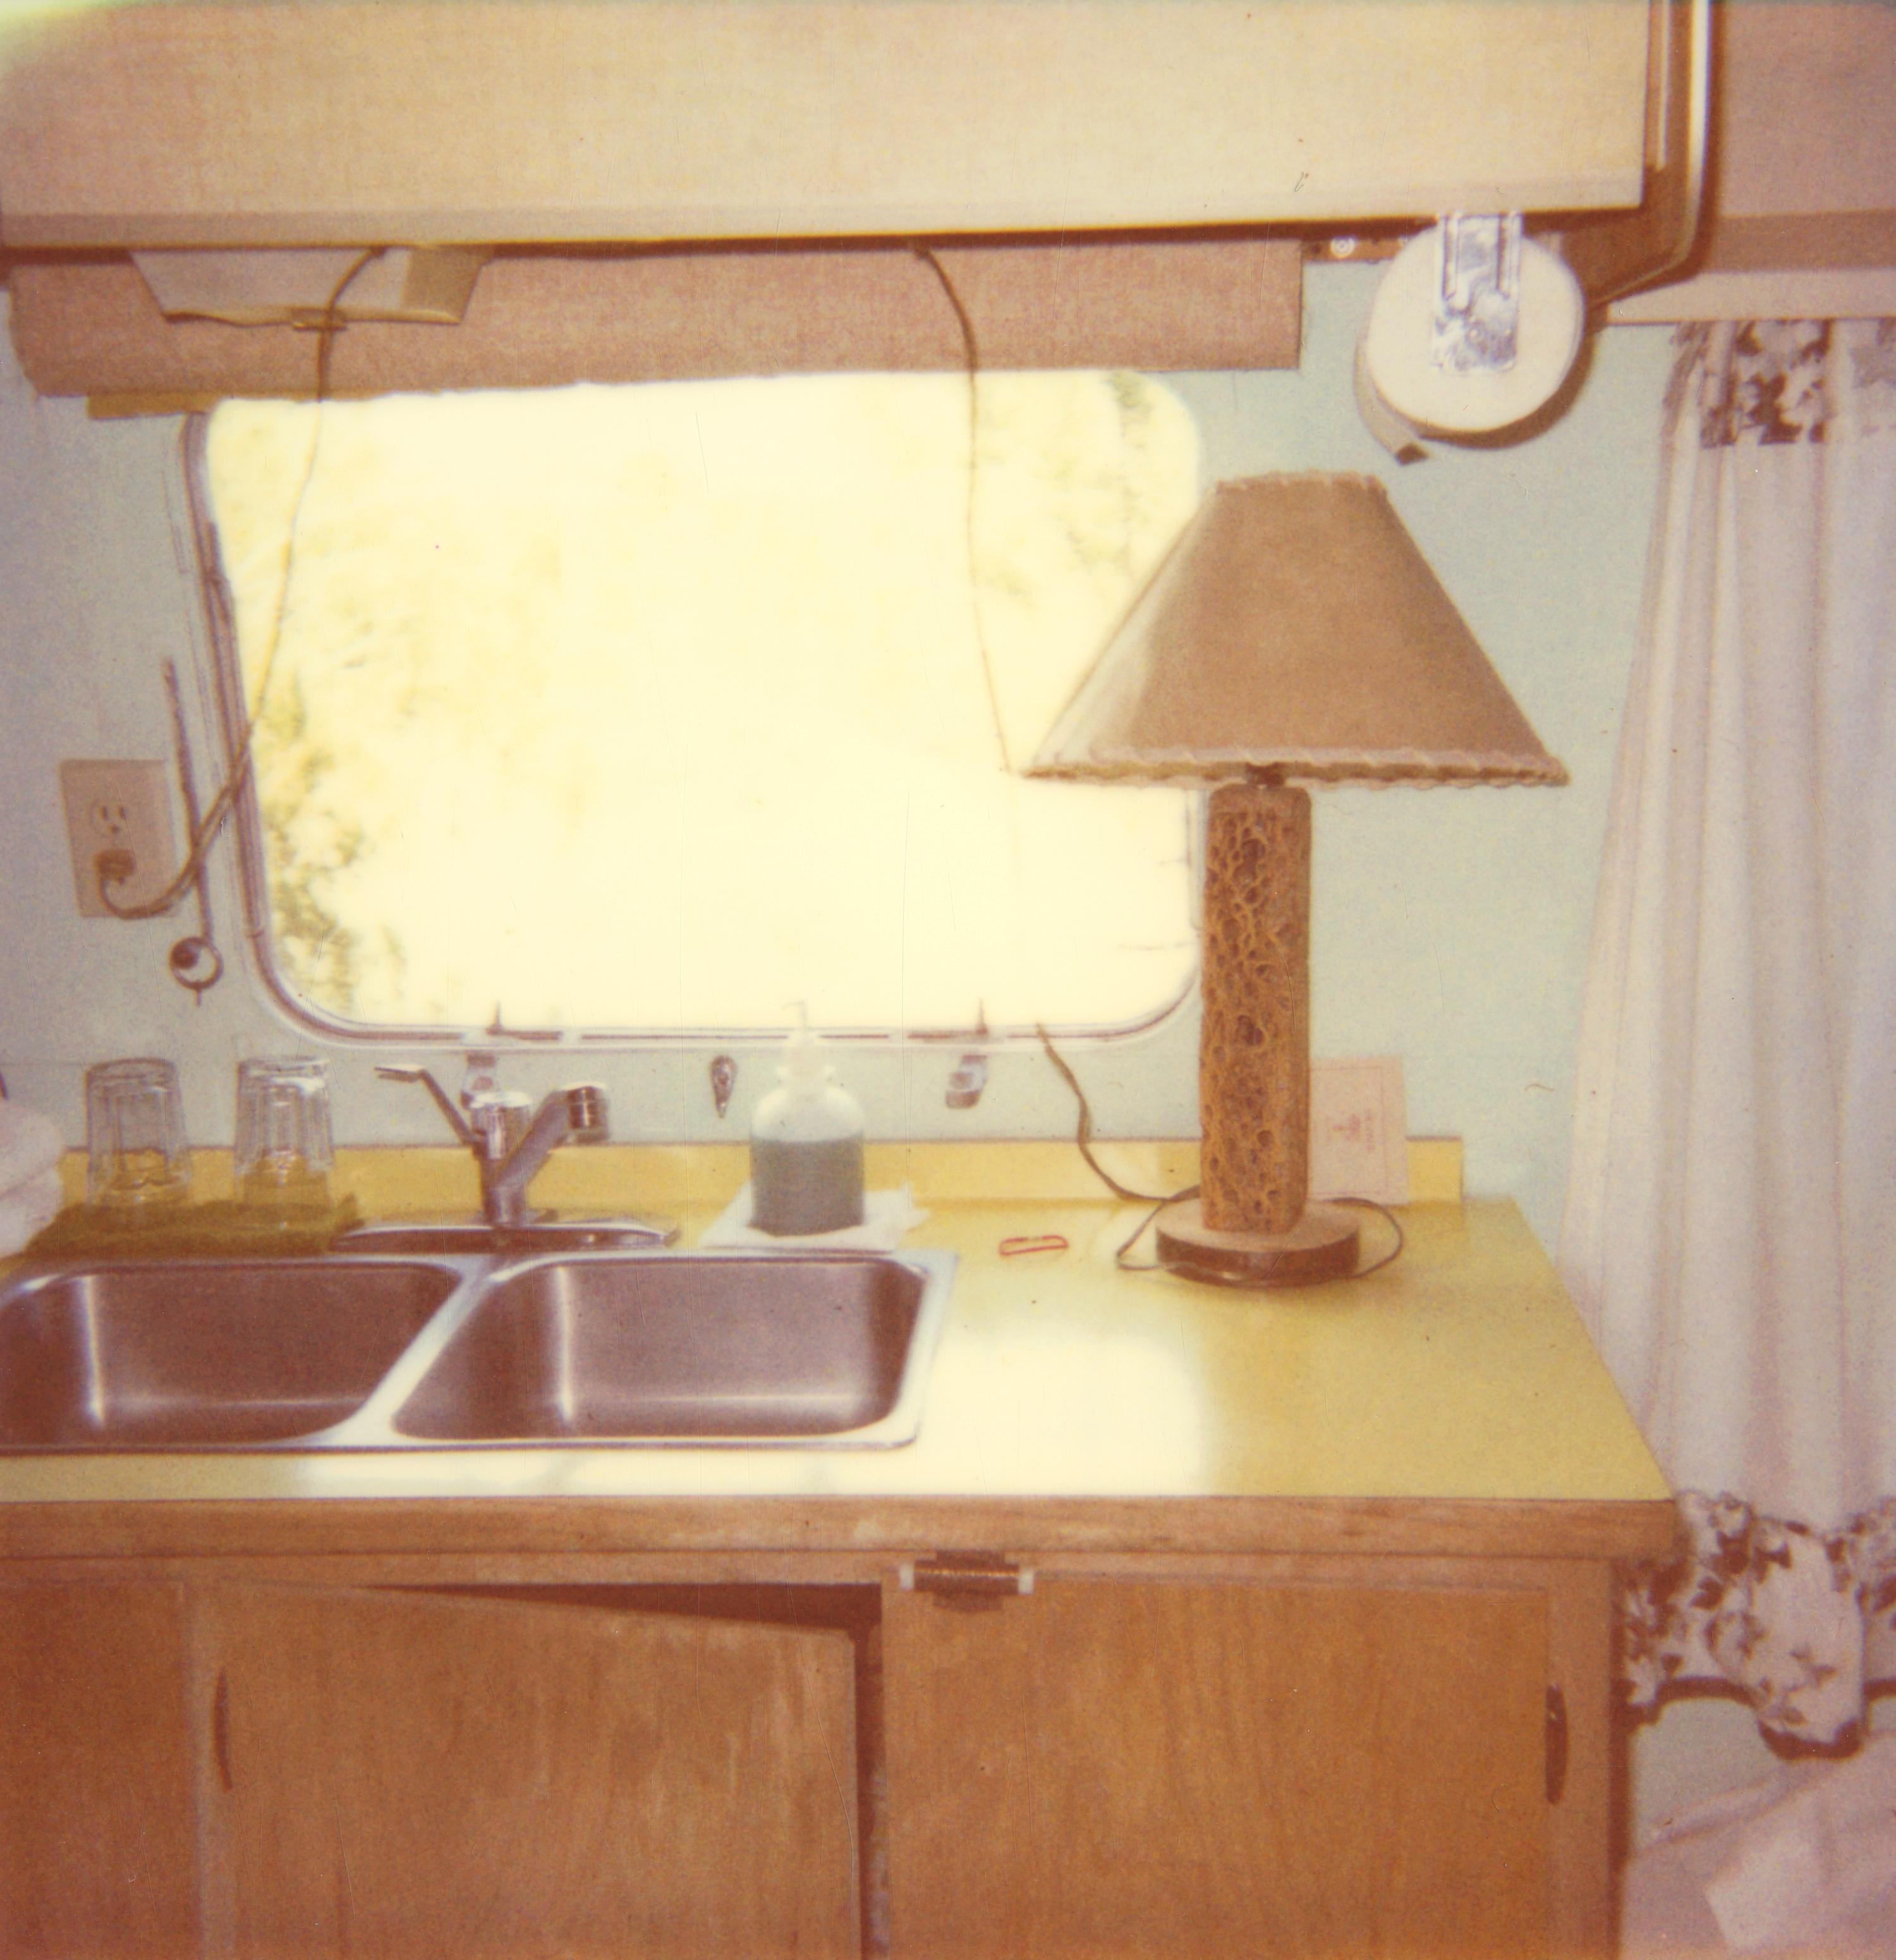 Airstream trailer outside of 29 Palms - Polaroid, 21st Century, Landscape, Color - Photograph by Stefanie Schneider